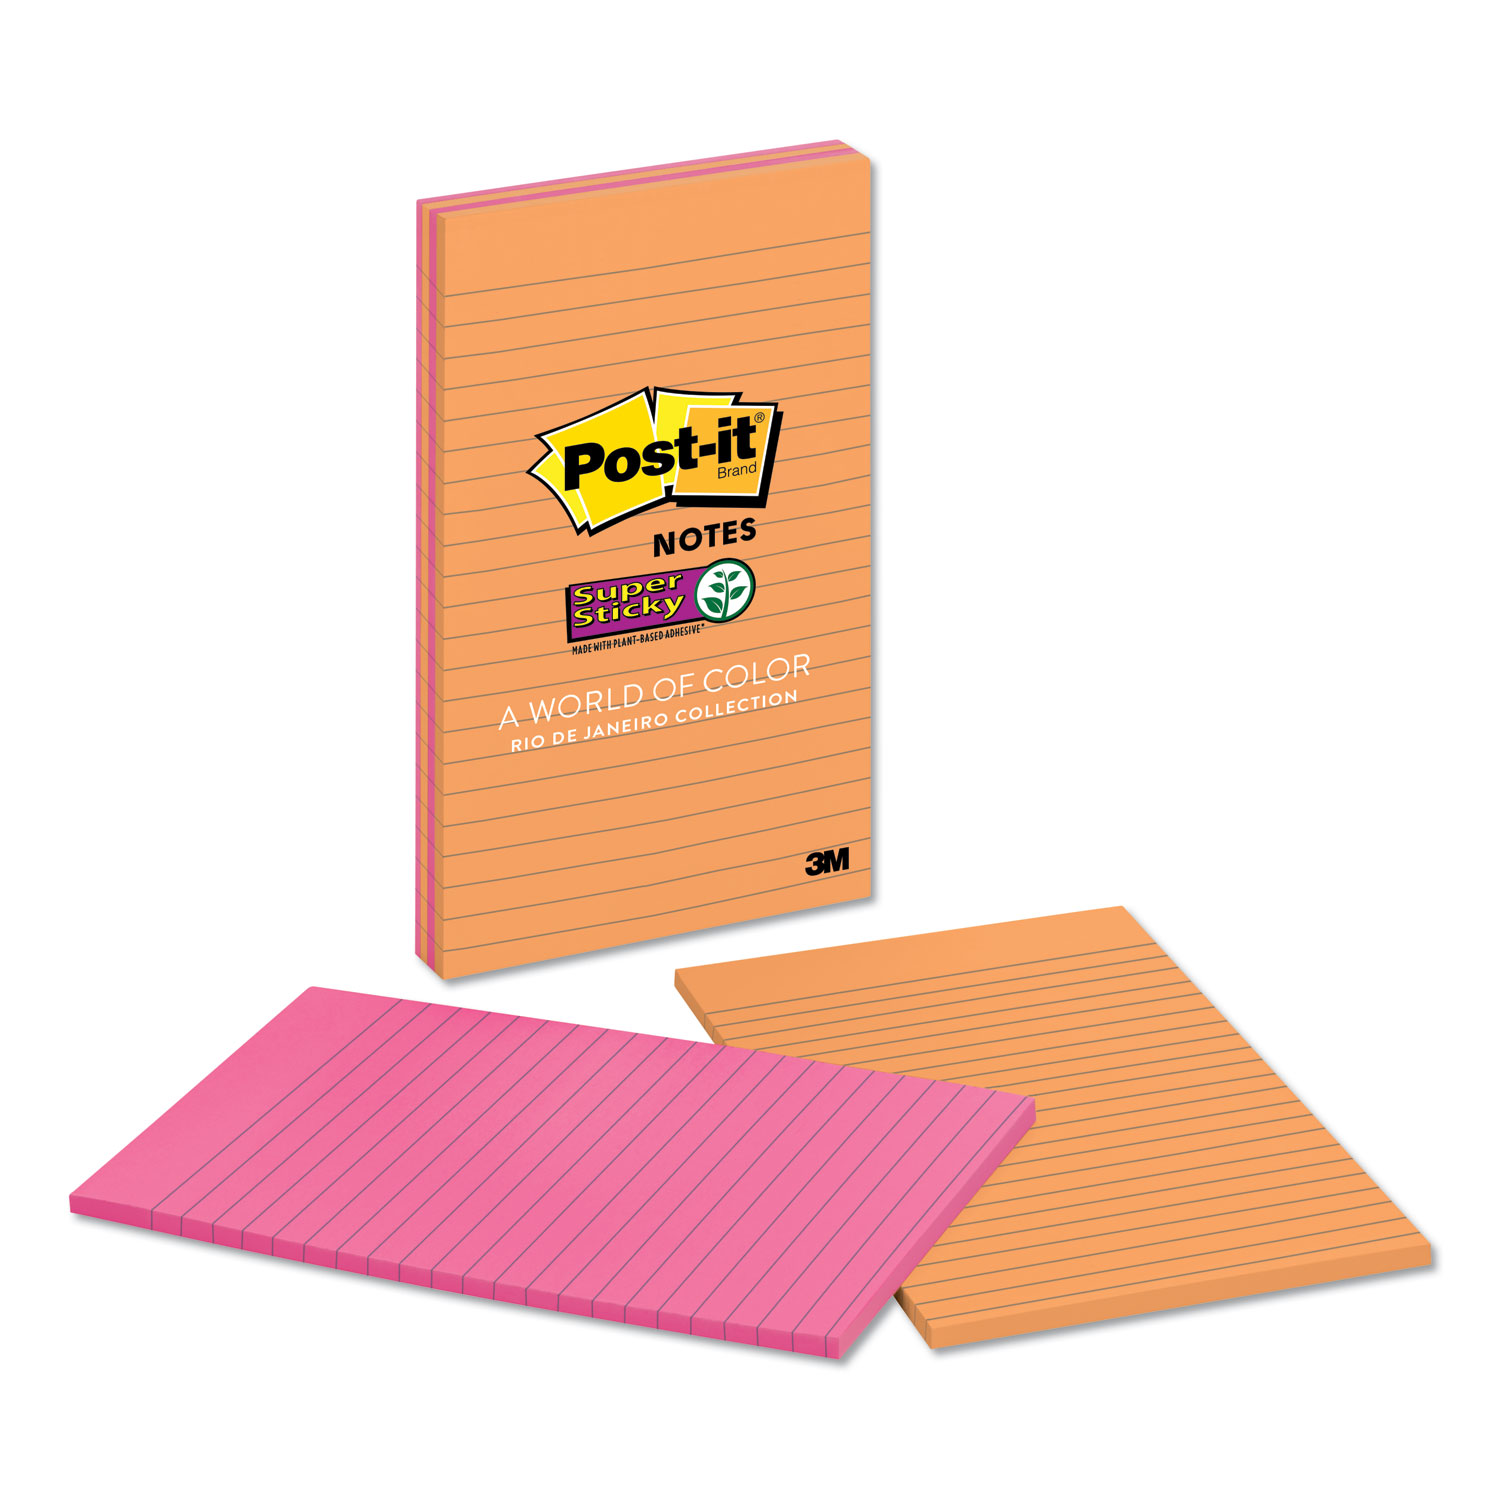  Post-it Notes Super Sticky 5845-SSUC Pads in Rio de Janeiro Colors, Lined, 5 x 8, 45-Sheet Pads, 4/Pack (MMM5845SSUC) 